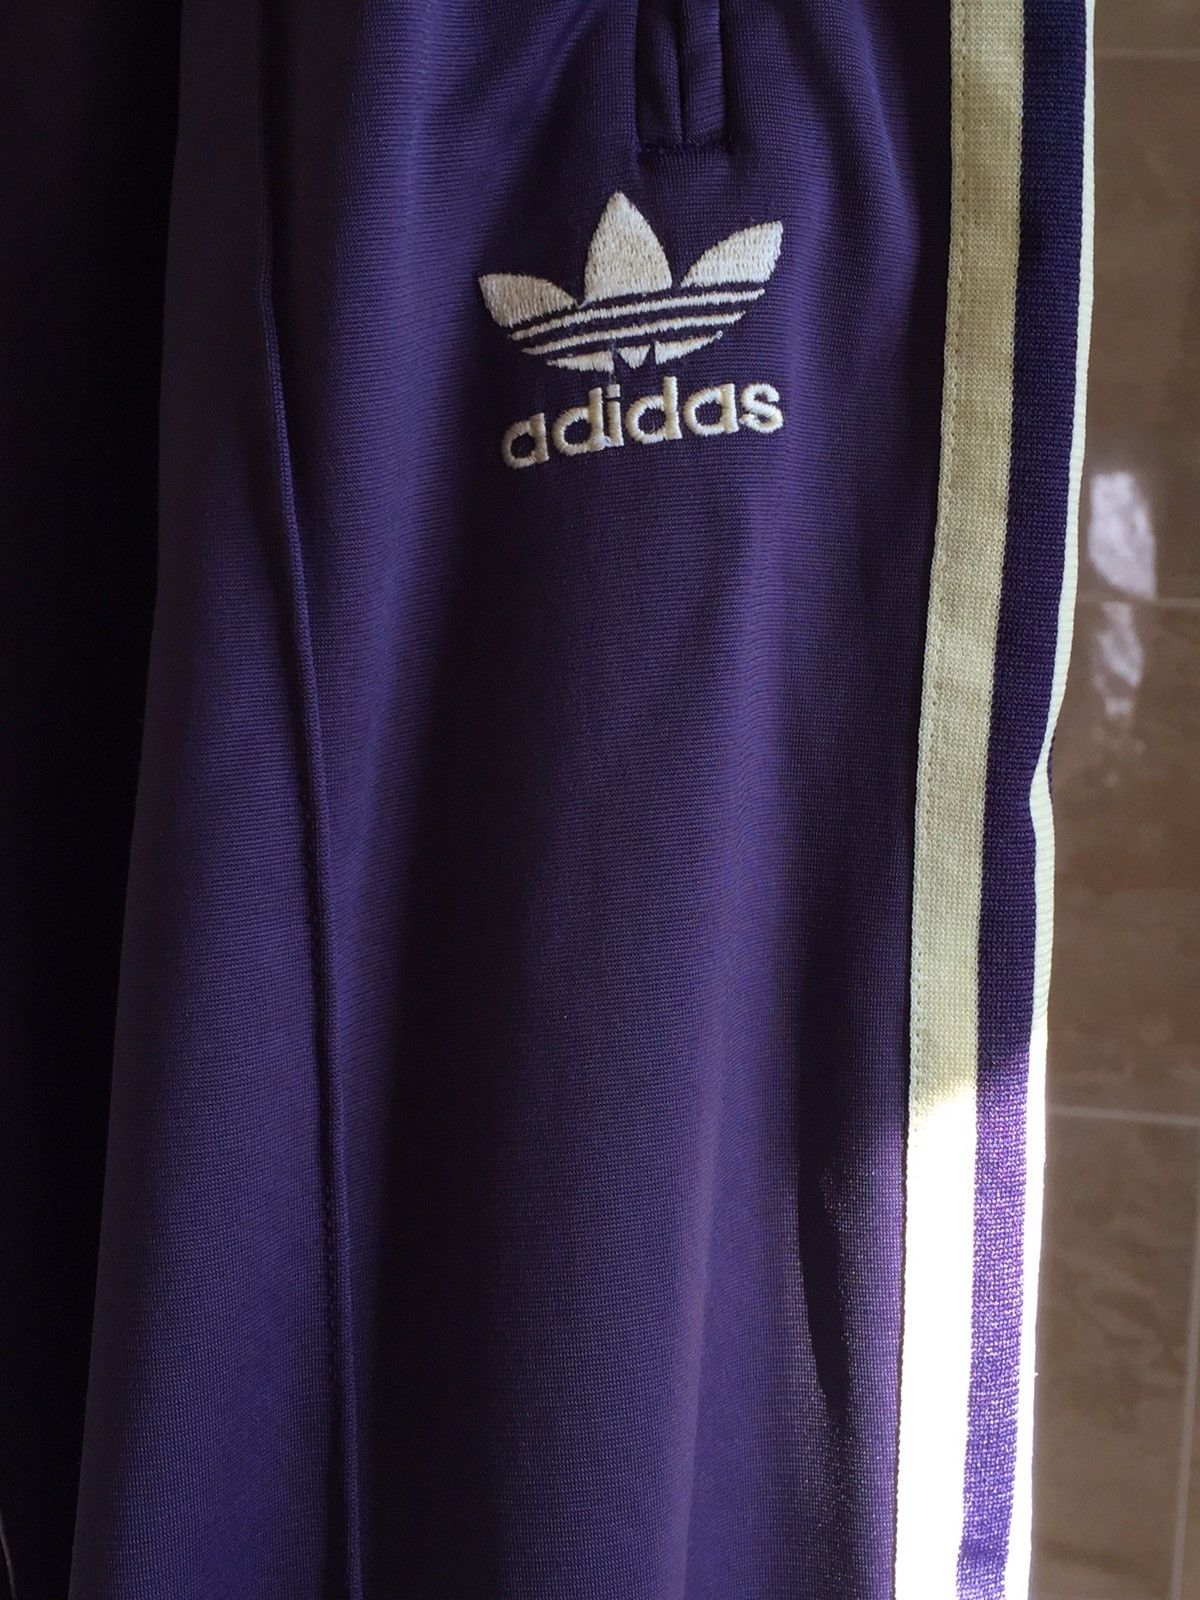 Adidas Pleated Track Pants Size US 32 / EU 48 - 2 Preview